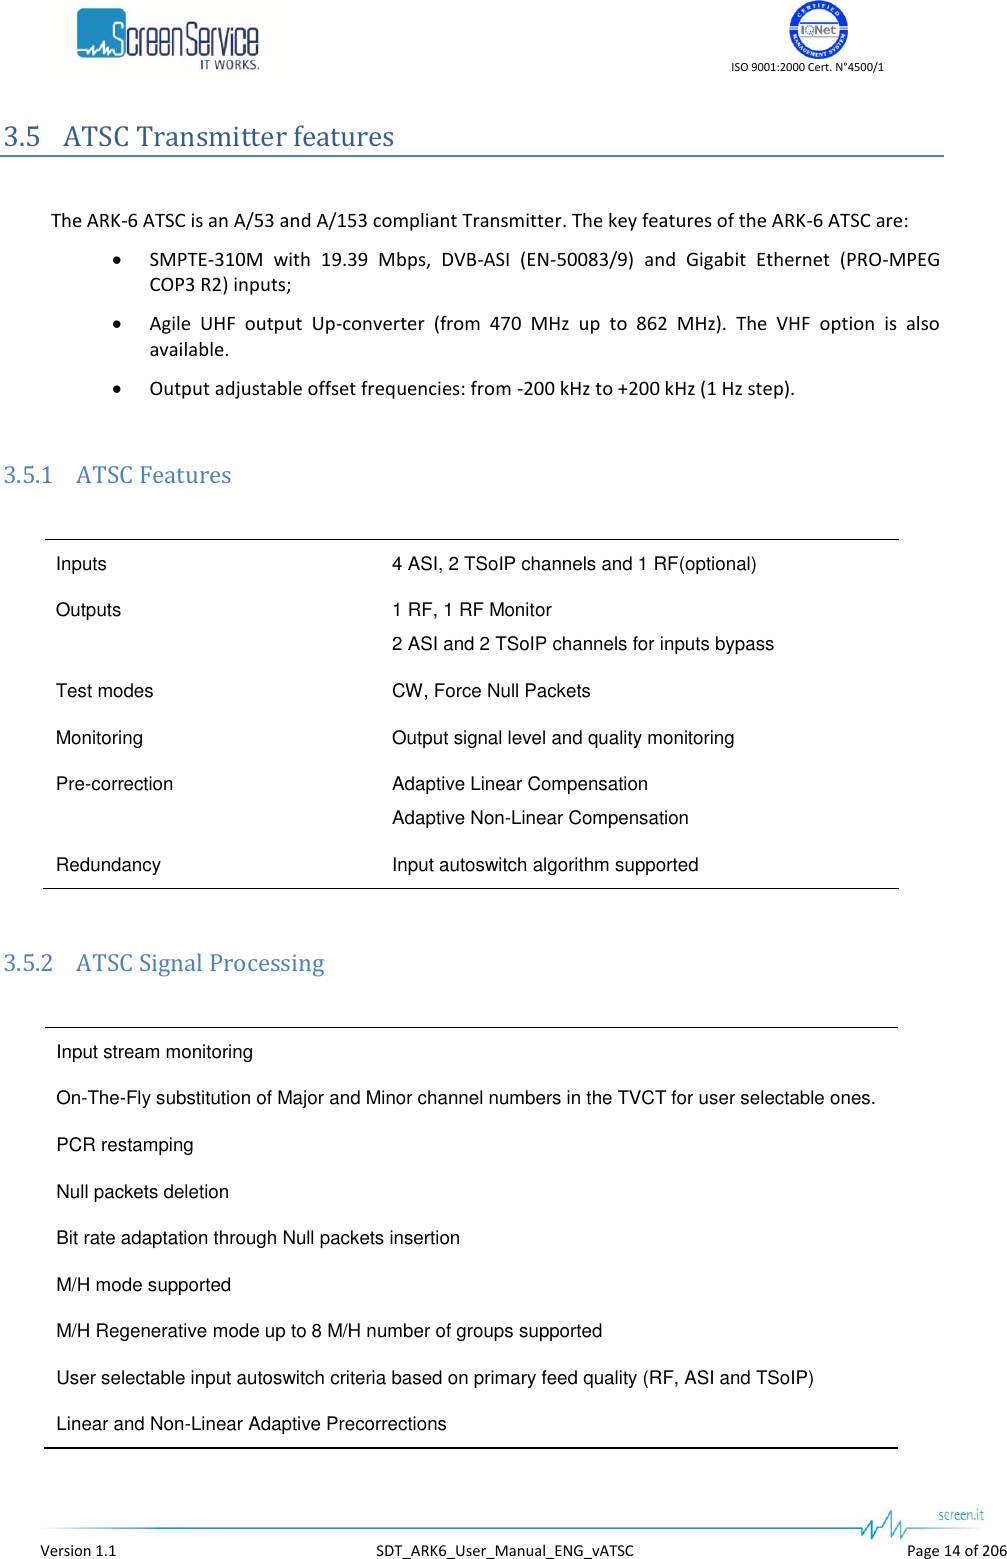    ISO 9001:2000 Cert. N°4500/1   Version 1.1  SDT_ARK6_User_Manual_ENG_vATSC  Page 14 of 206 3.5 ATSC Transmitter features  The ARK-6 ATSC is an A/53 and A/153 compliant Transmitter. The key features of the ARK-6 ATSC are:  SMPTE-310M  with  19.39  Mbps,  DVB-ASI  (EN-50083/9)  and  Gigabit  Ethernet  (PRO-MPEG COP3 R2) inputs;  Agile  UHF  output  Up-converter  (from  470  MHz  up  to  862  MHz).  The  VHF  option  is  also available.  Output adjustable offset frequencies: from -200 kHz to +200 kHz (1 Hz step).  3.5.1 ATSC Features  Inputs 4 ASI, 2 TSoIP channels and 1 RF(optional) Outputs 1 RF, 1 RF Monitor 2 ASI and 2 TSoIP channels for inputs bypass Test modes CW, Force Null Packets Monitoring Output signal level and quality monitoring Pre-correction Adaptive Linear Compensation Adaptive Non-Linear Compensation Redundancy Input autoswitch algorithm supported  3.5.2 ATSC Signal Processing  Input stream monitoring On-The-Fly substitution of Major and Minor channel numbers in the TVCT for user selectable ones. PCR restamping Null packets deletion Bit rate adaptation through Null packets insertion M/H mode supported M/H Regenerative mode up to 8 M/H number of groups supported User selectable input autoswitch criteria based on primary feed quality (RF, ASI and TSoIP) Linear and Non-Linear Adaptive Precorrections 